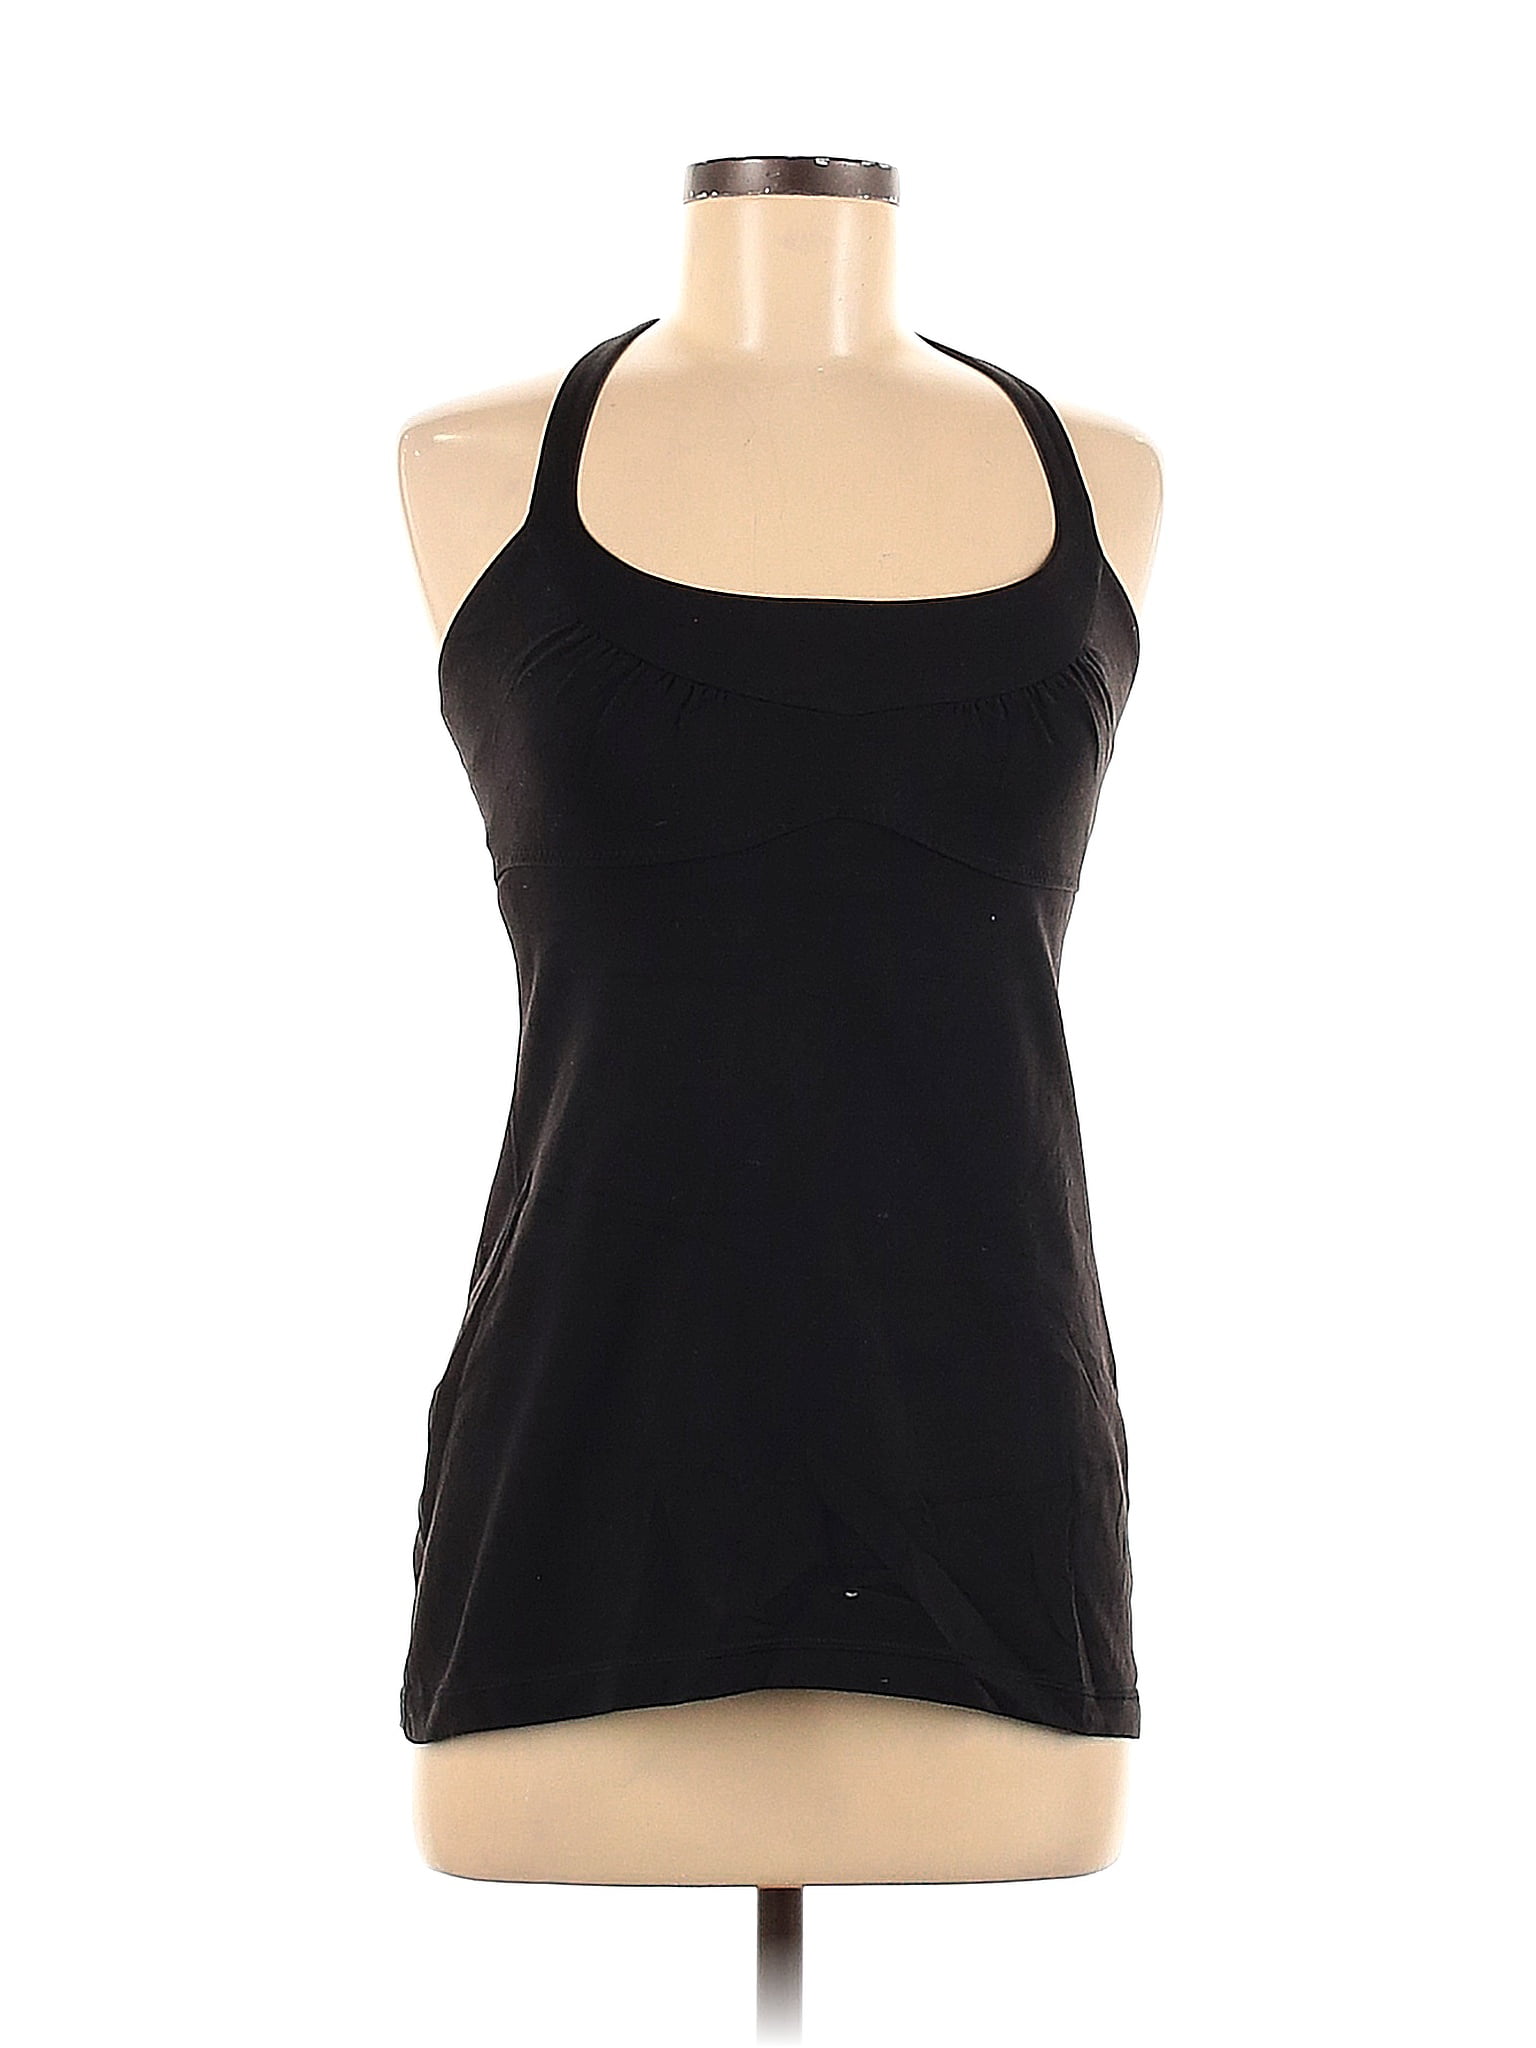 Pre-Owned Lululemon Athletica Womens Size 8 Active Palestine